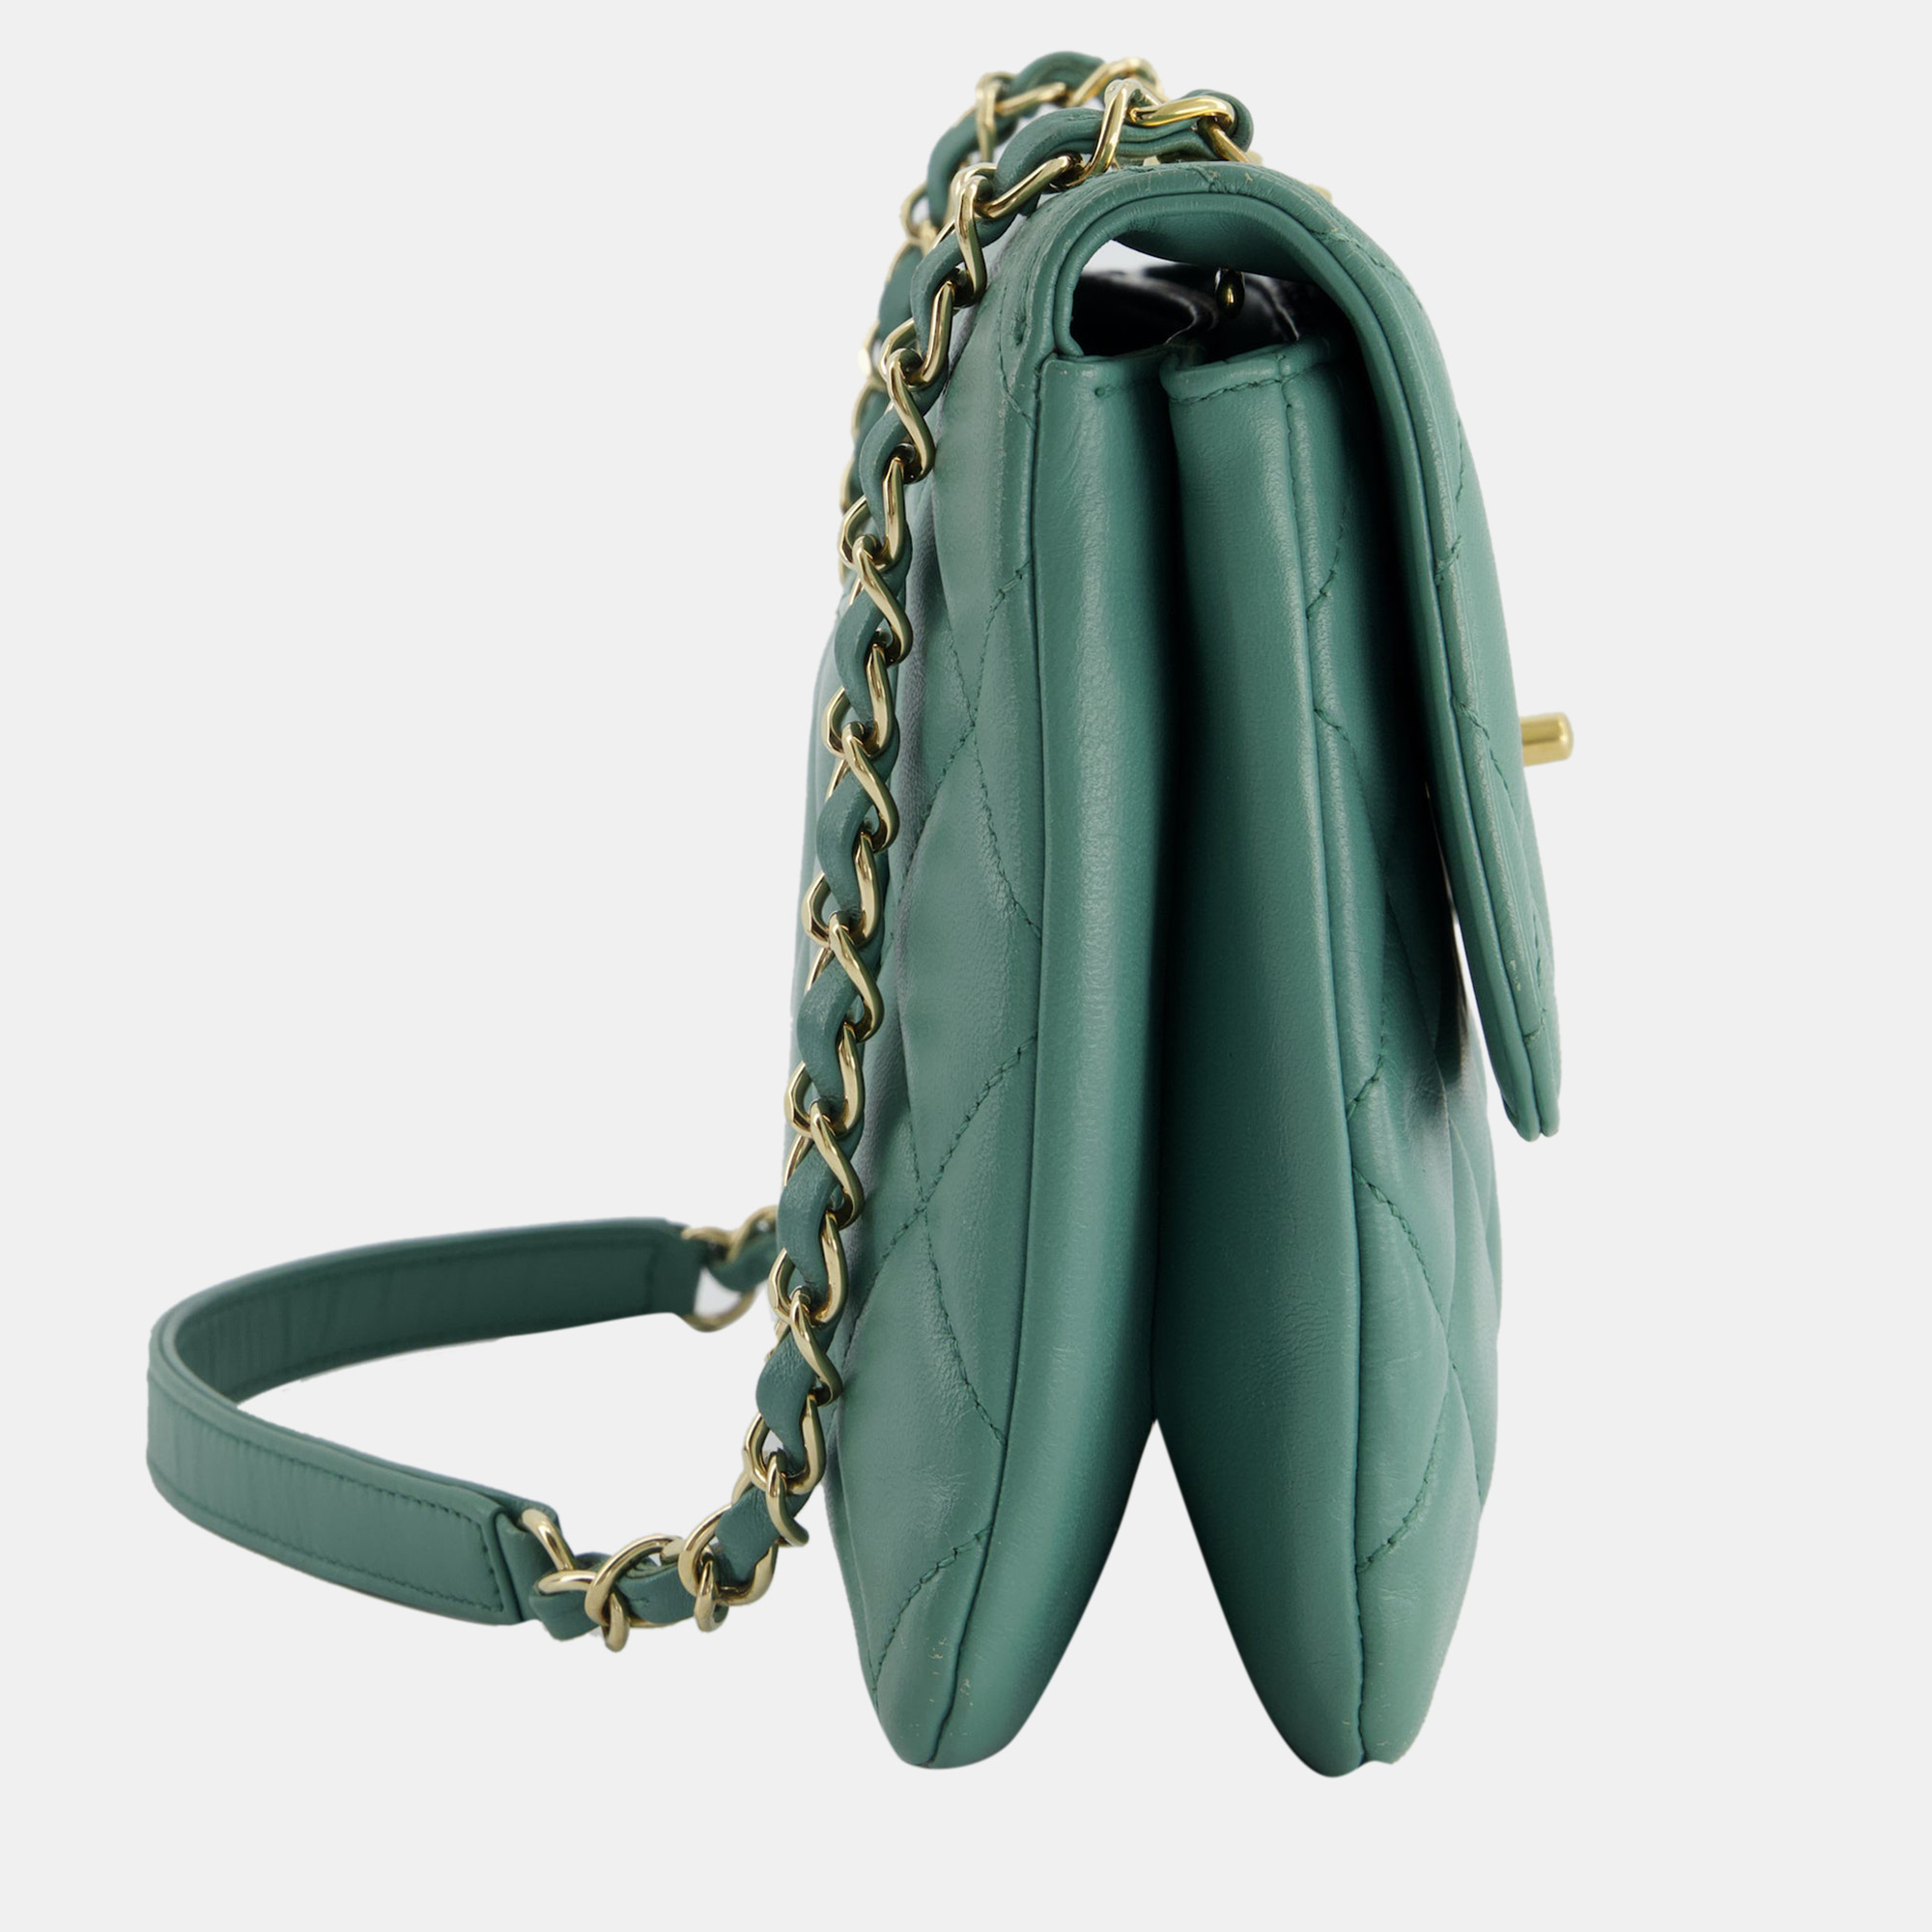 Chanel Teal Trendy CC Shoulder Bag In Lambskin Leather With Gold Hardware